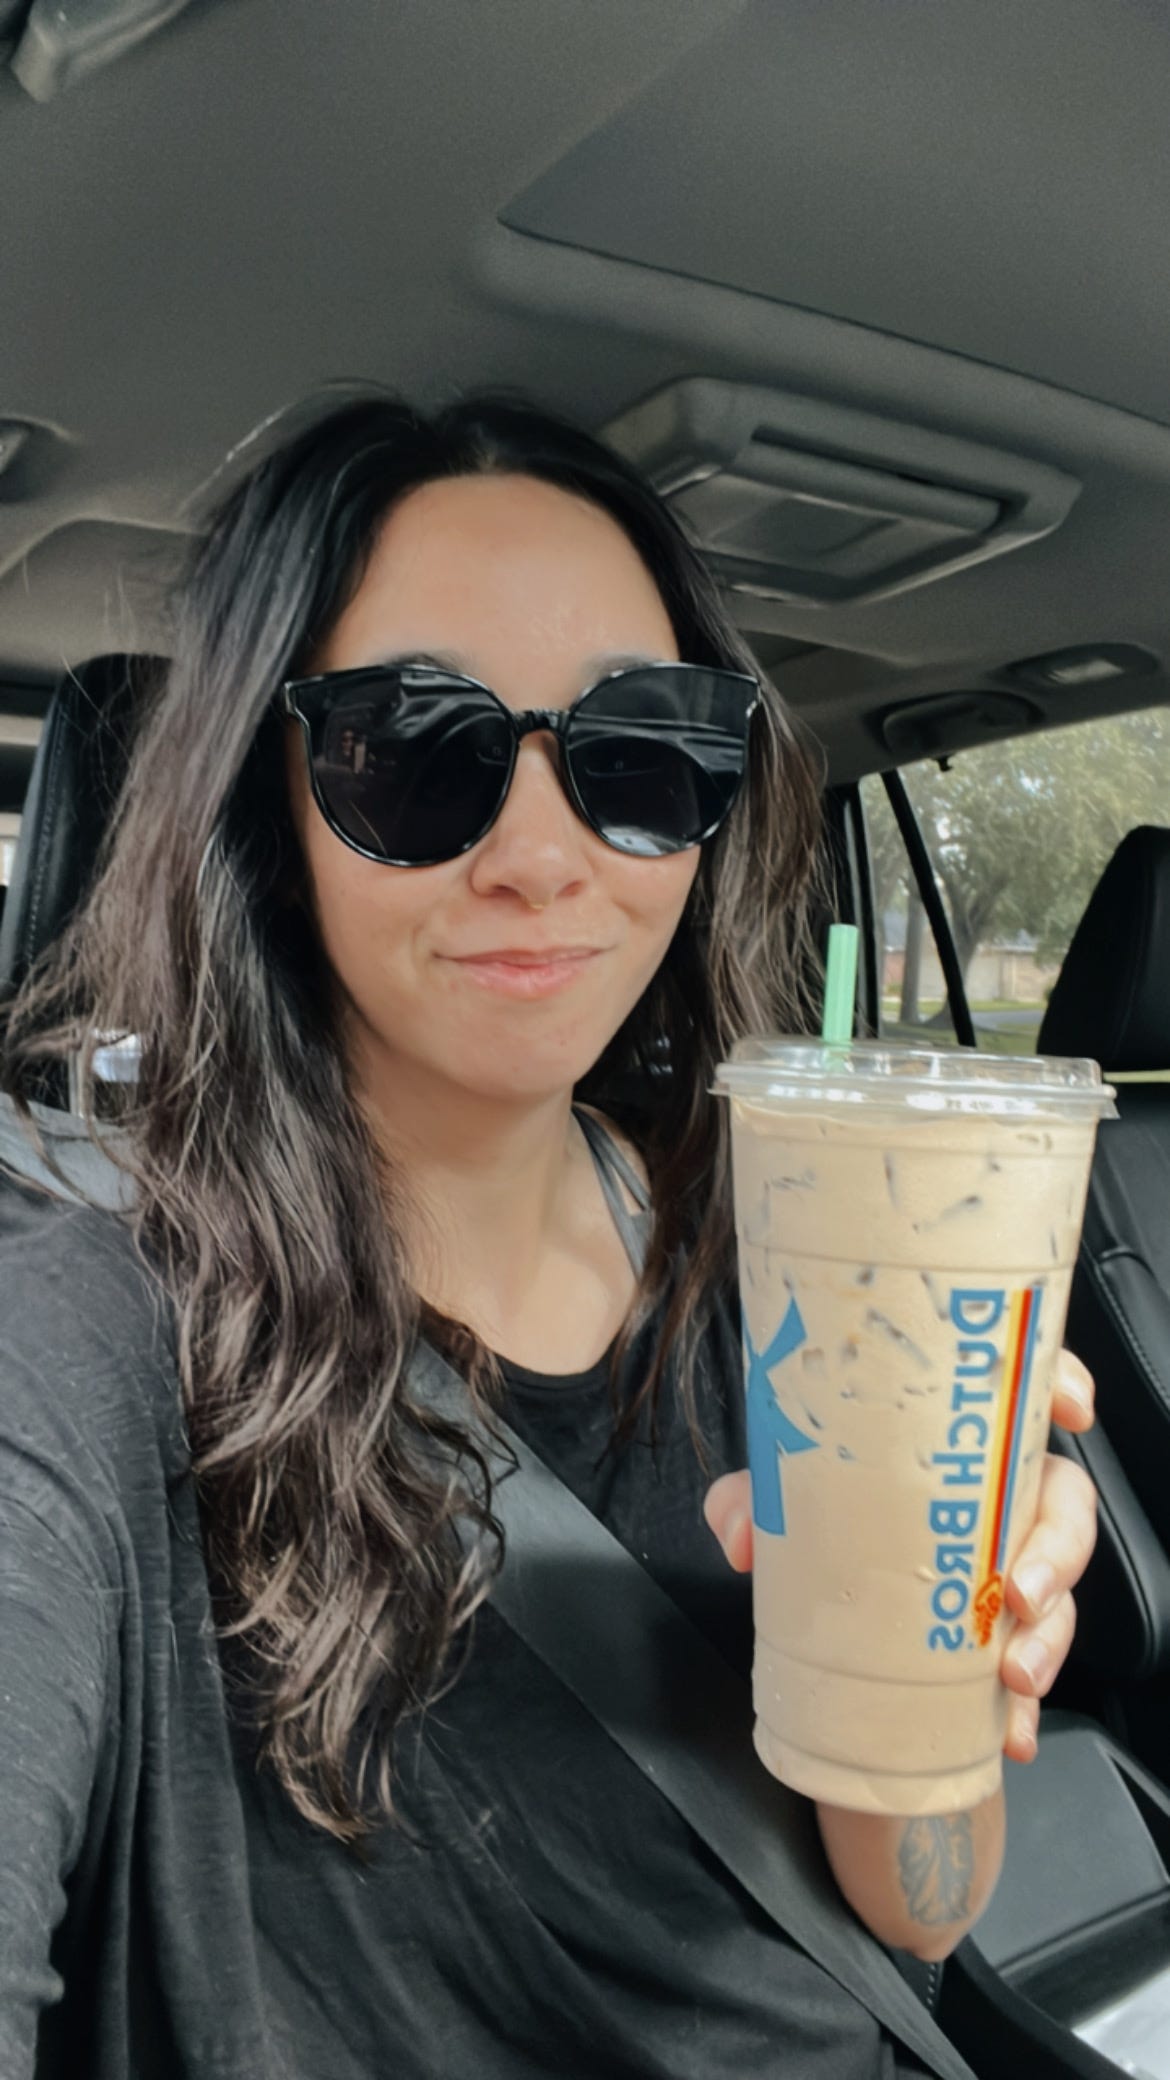 Image of Jenai holding up a coffee drink from Dutch Bros.